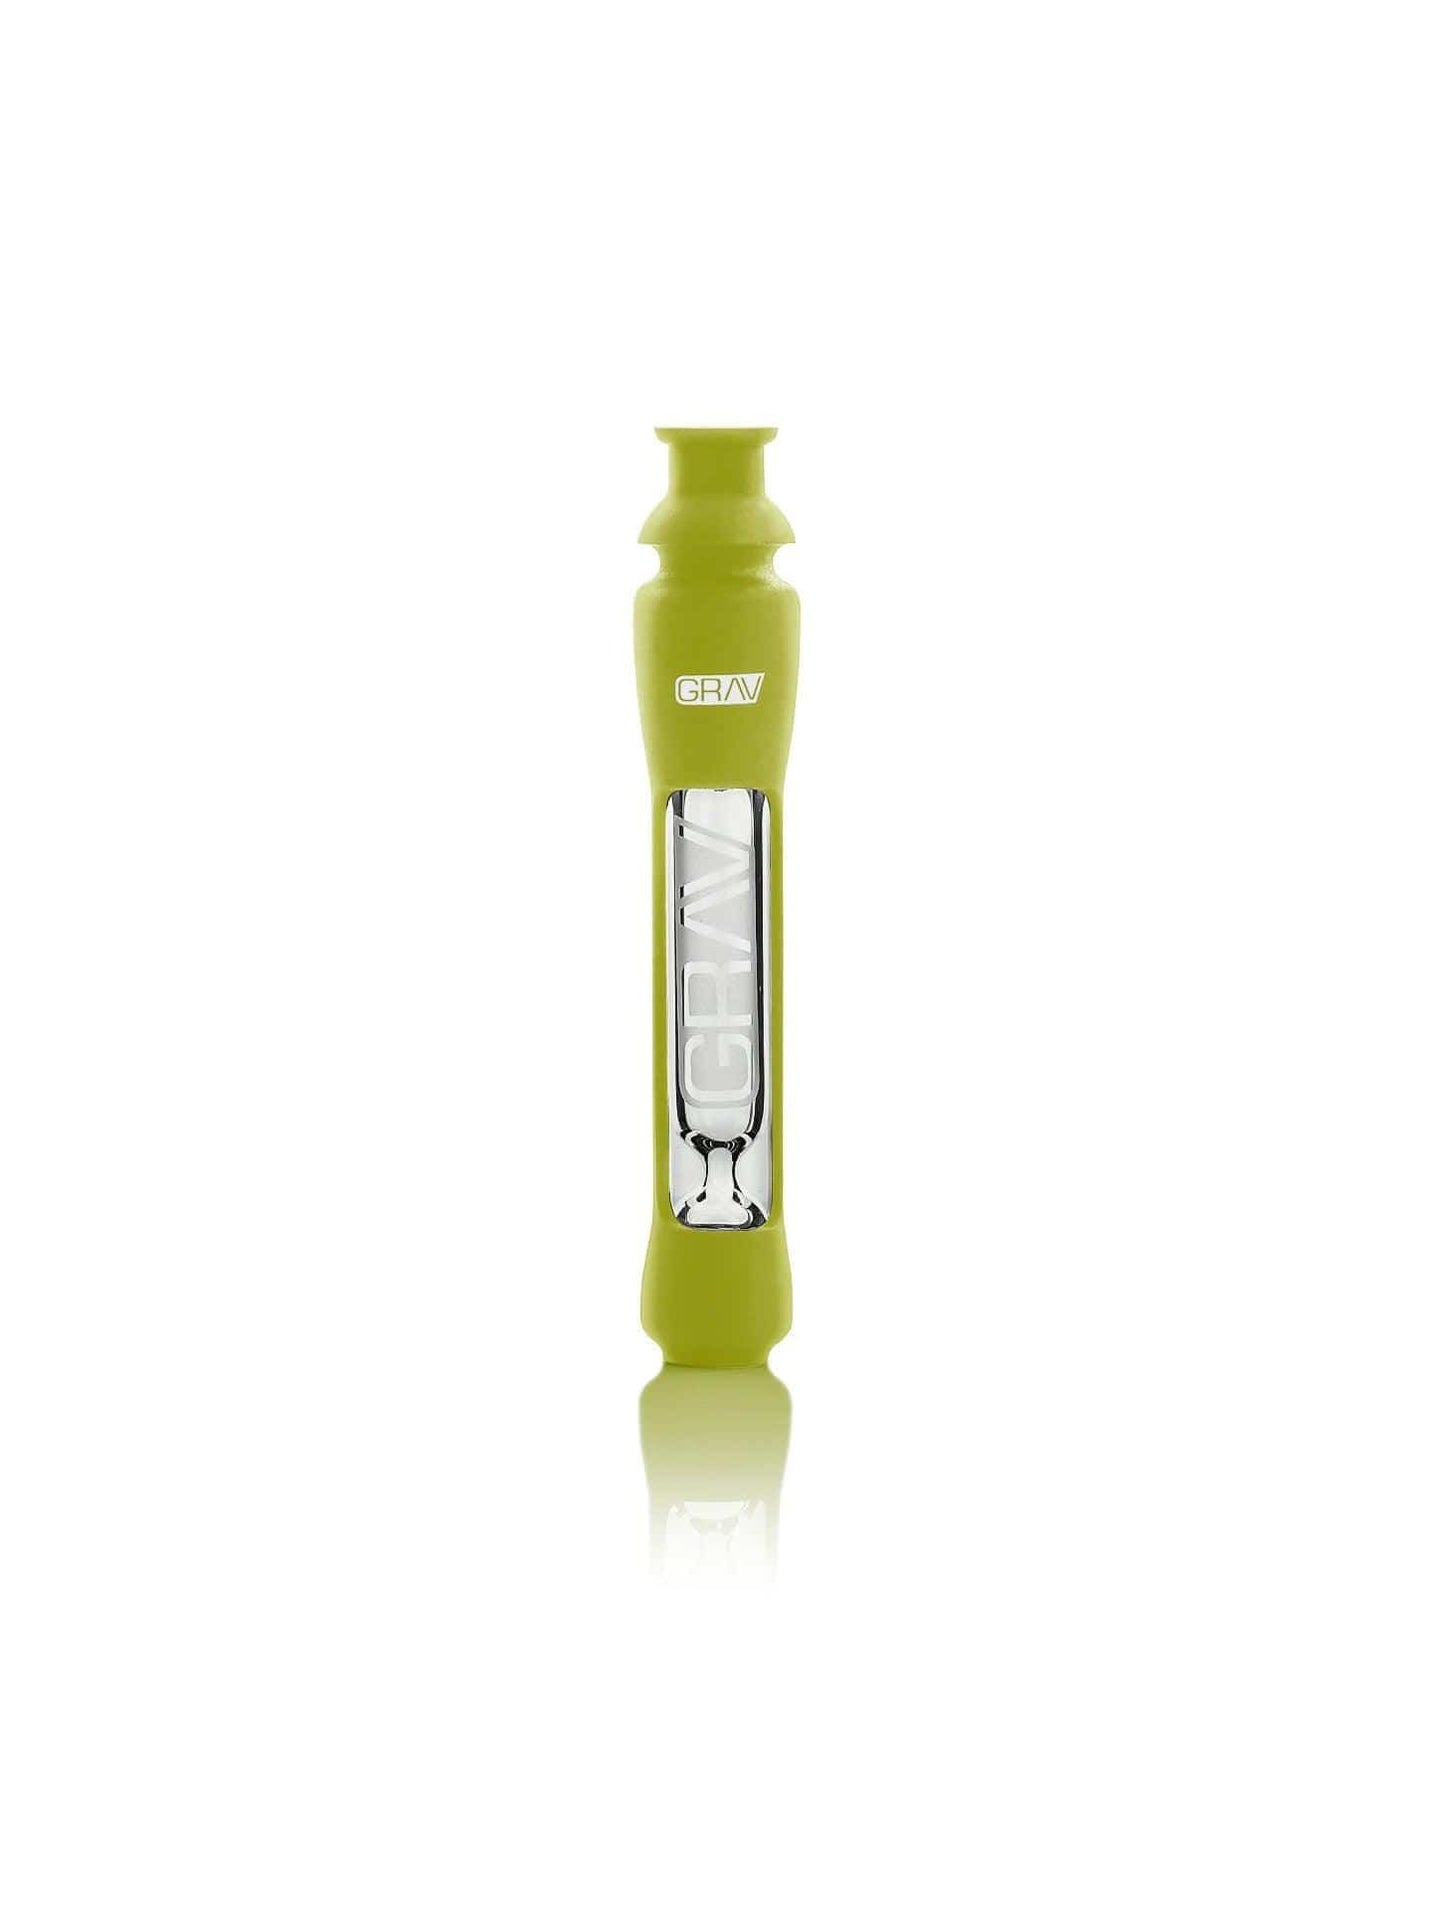 GRAV Hand Pipe Avocado Green GRAV® 12mm Taster® with Silicone Skin - Assorted Colors